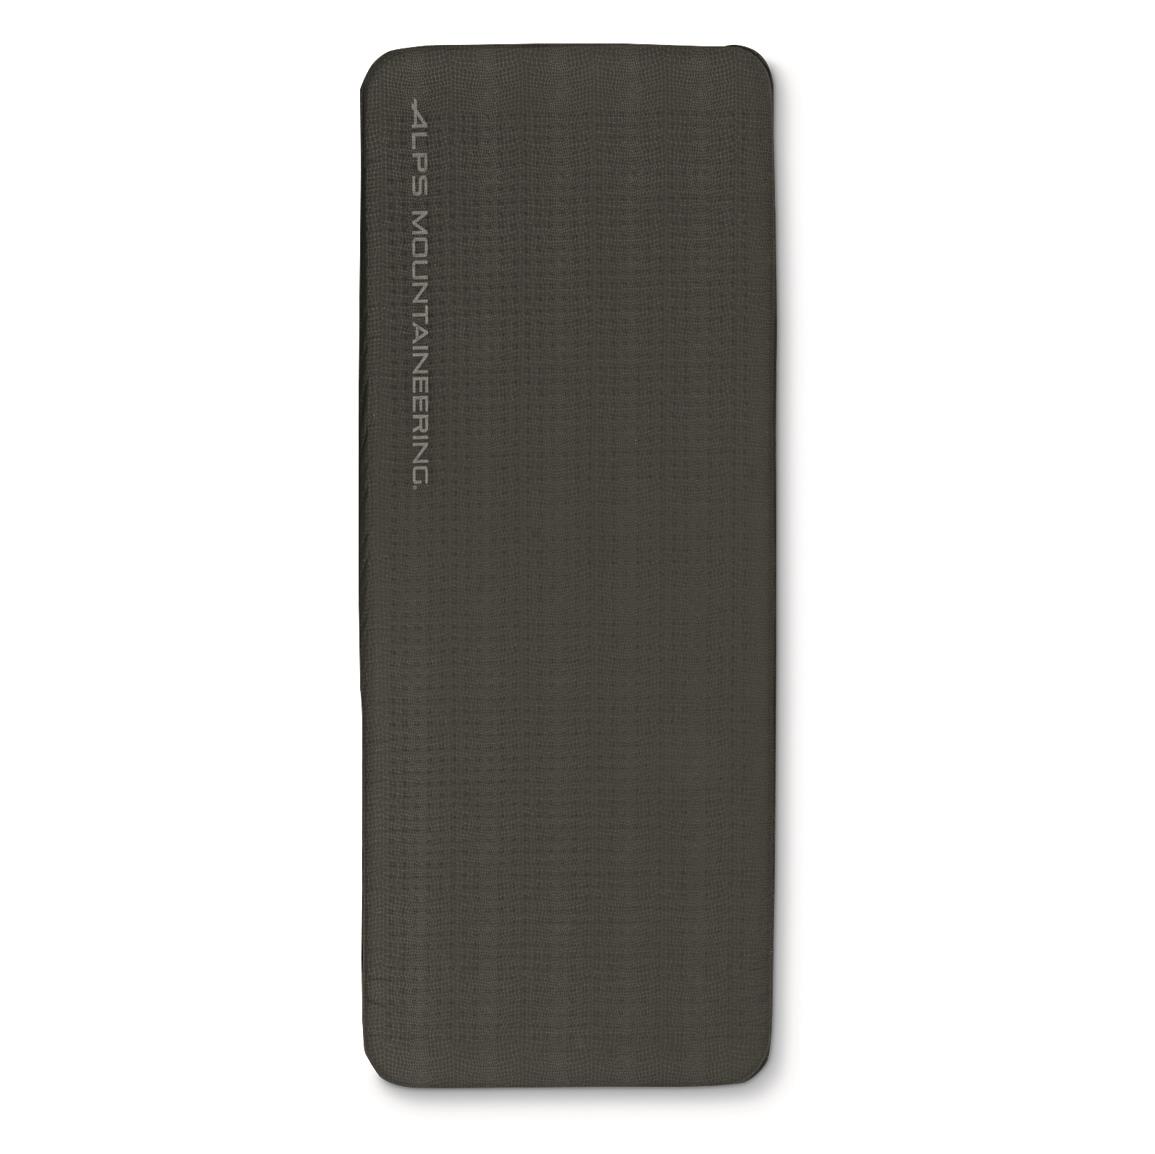 ALPS Mountaineering Outback Mat Sleeping Pad